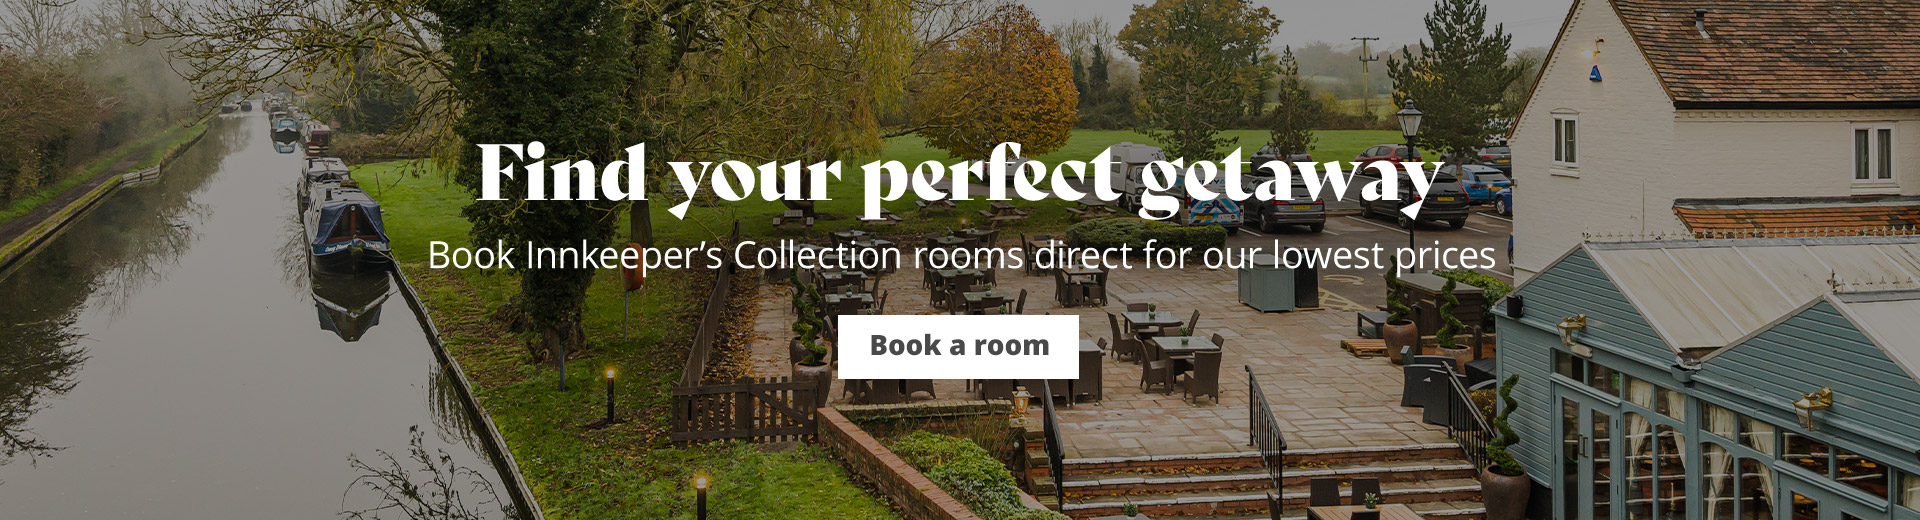 Book an Innkeeper's Collection room